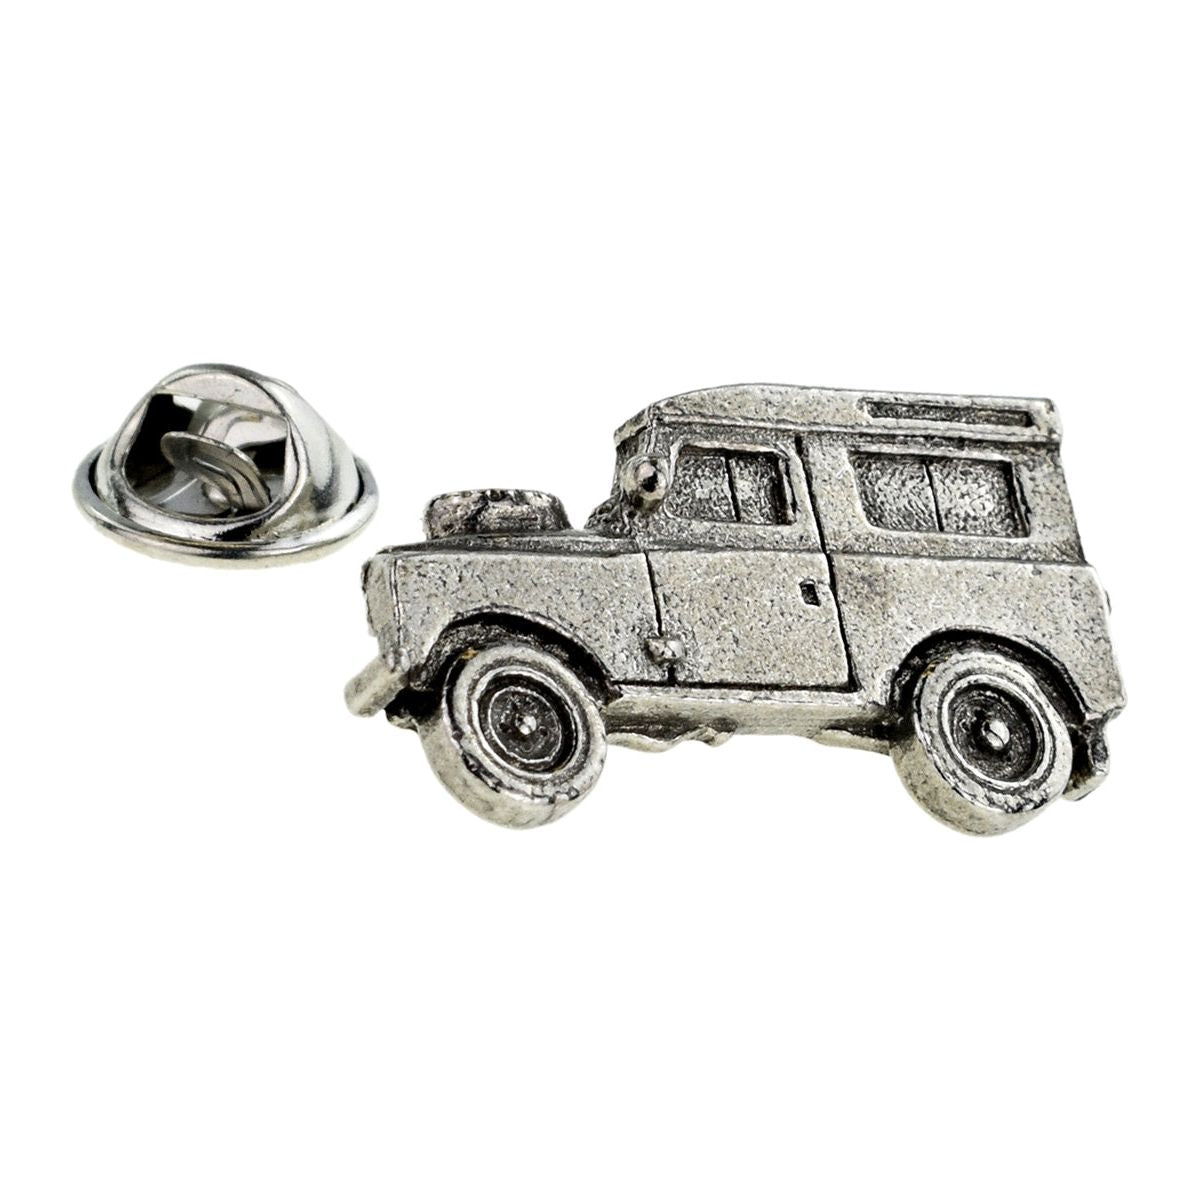 Country Land Vehicle 4x4 Pewter Lapel Pin Badge - Ashton and Finch